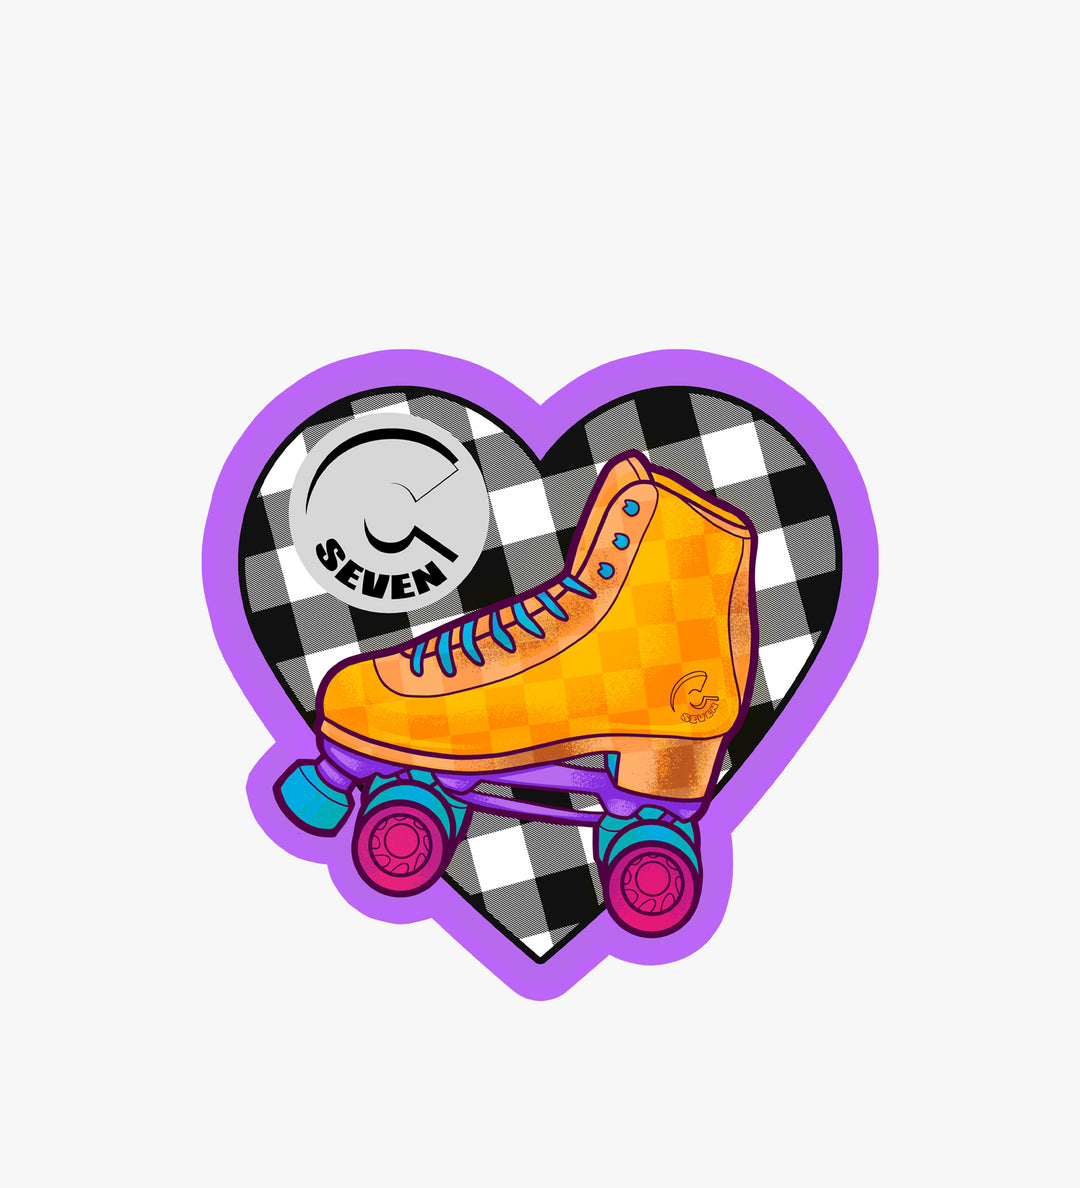 C7skates Love to Skate decorative heart sticker with black and orange details: 3 x 3-inches in a matte finish print. 